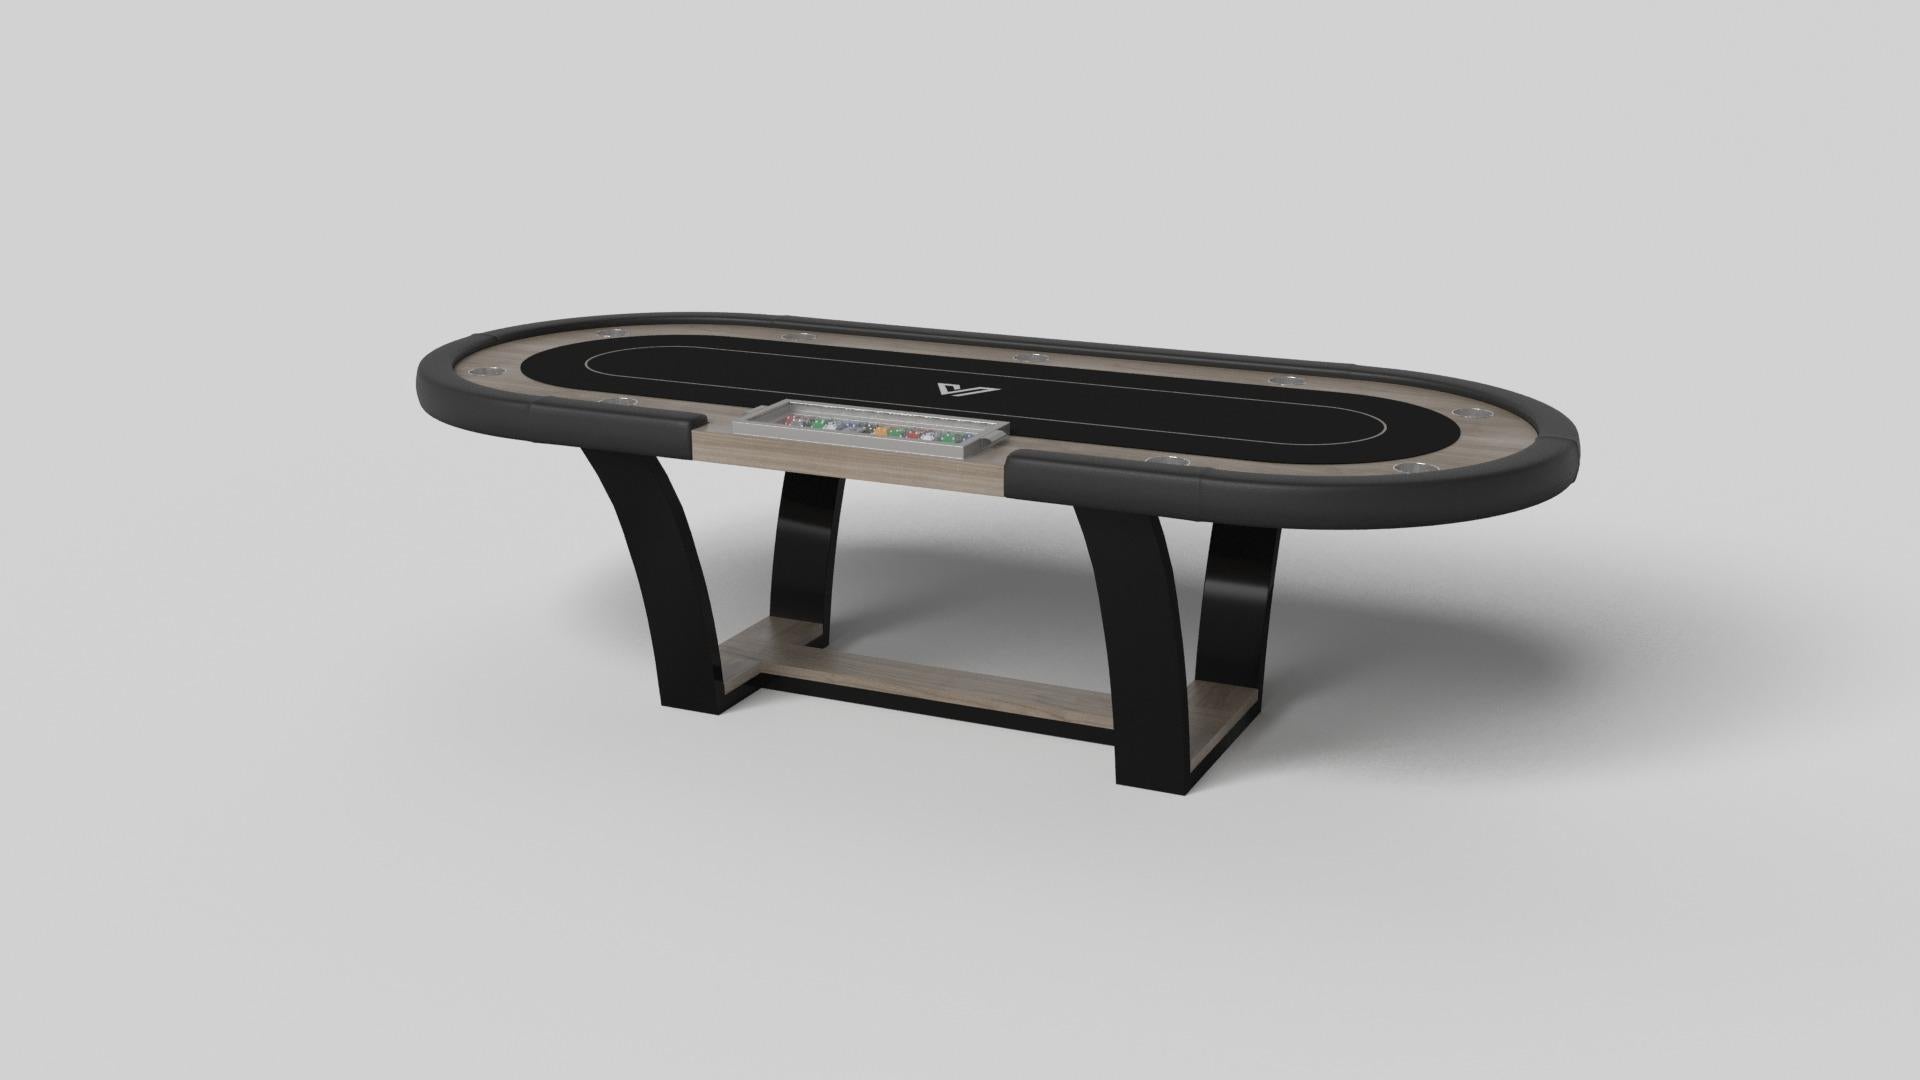 With an I-shaped metal base, slightly sloped metal legs, and a contrasting wood top, the Elite poker table exudes modern sophistication while evoking a sense of art deco design. This table is a confluence of style, made to meet today's demands and